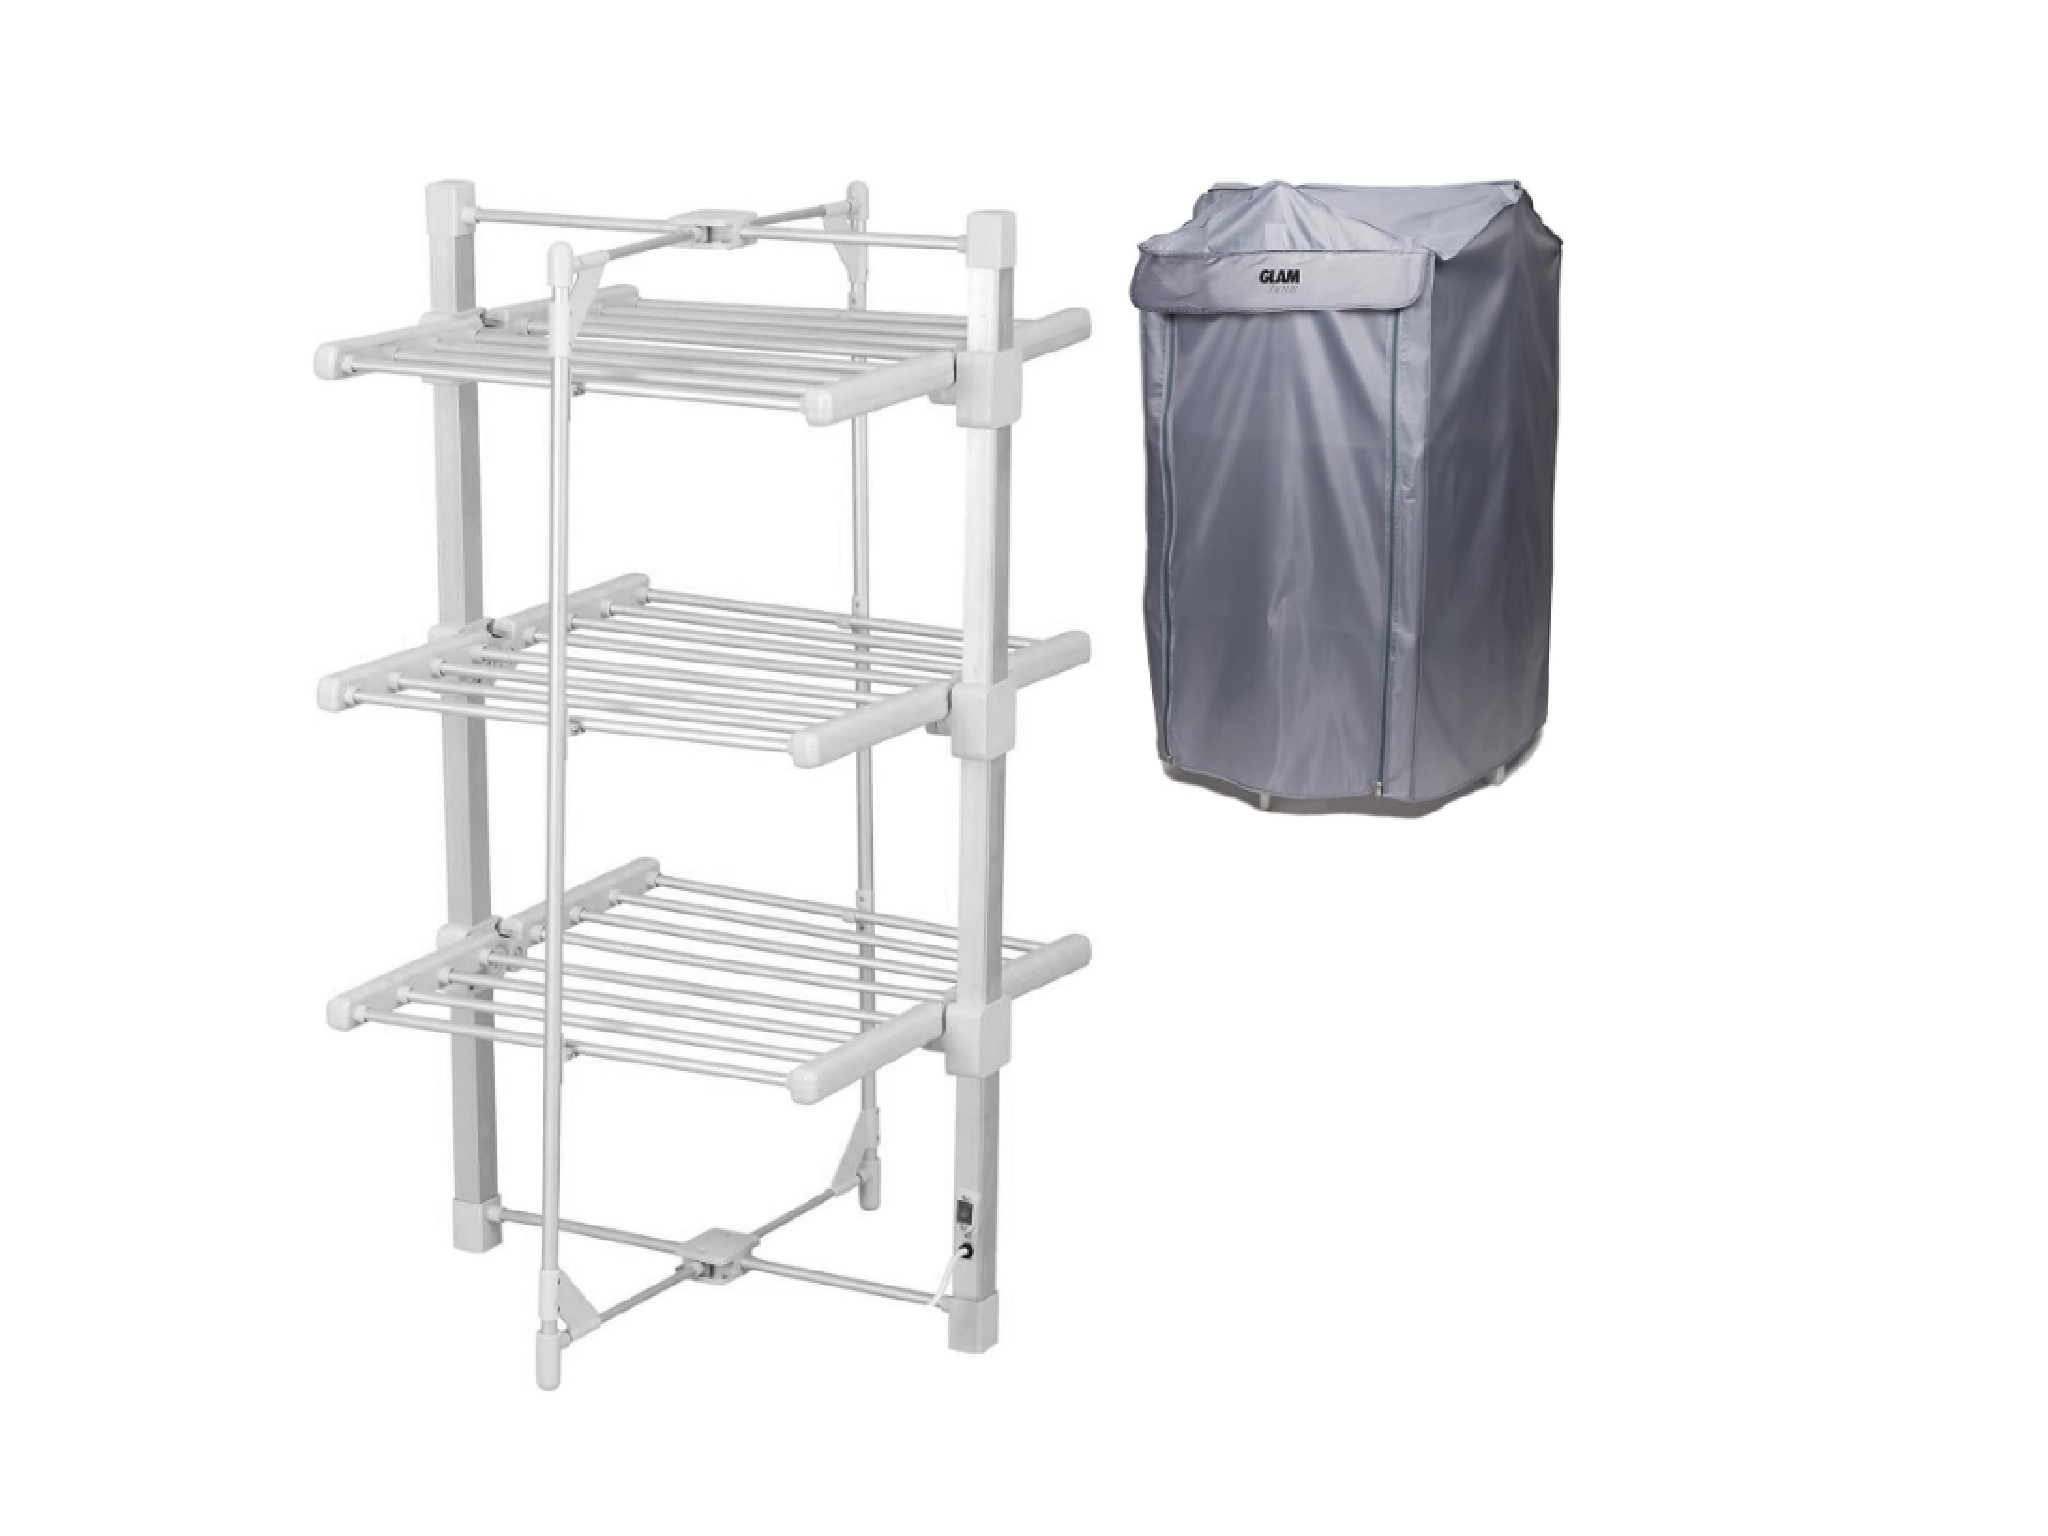 Glamhaus heated airer with wings